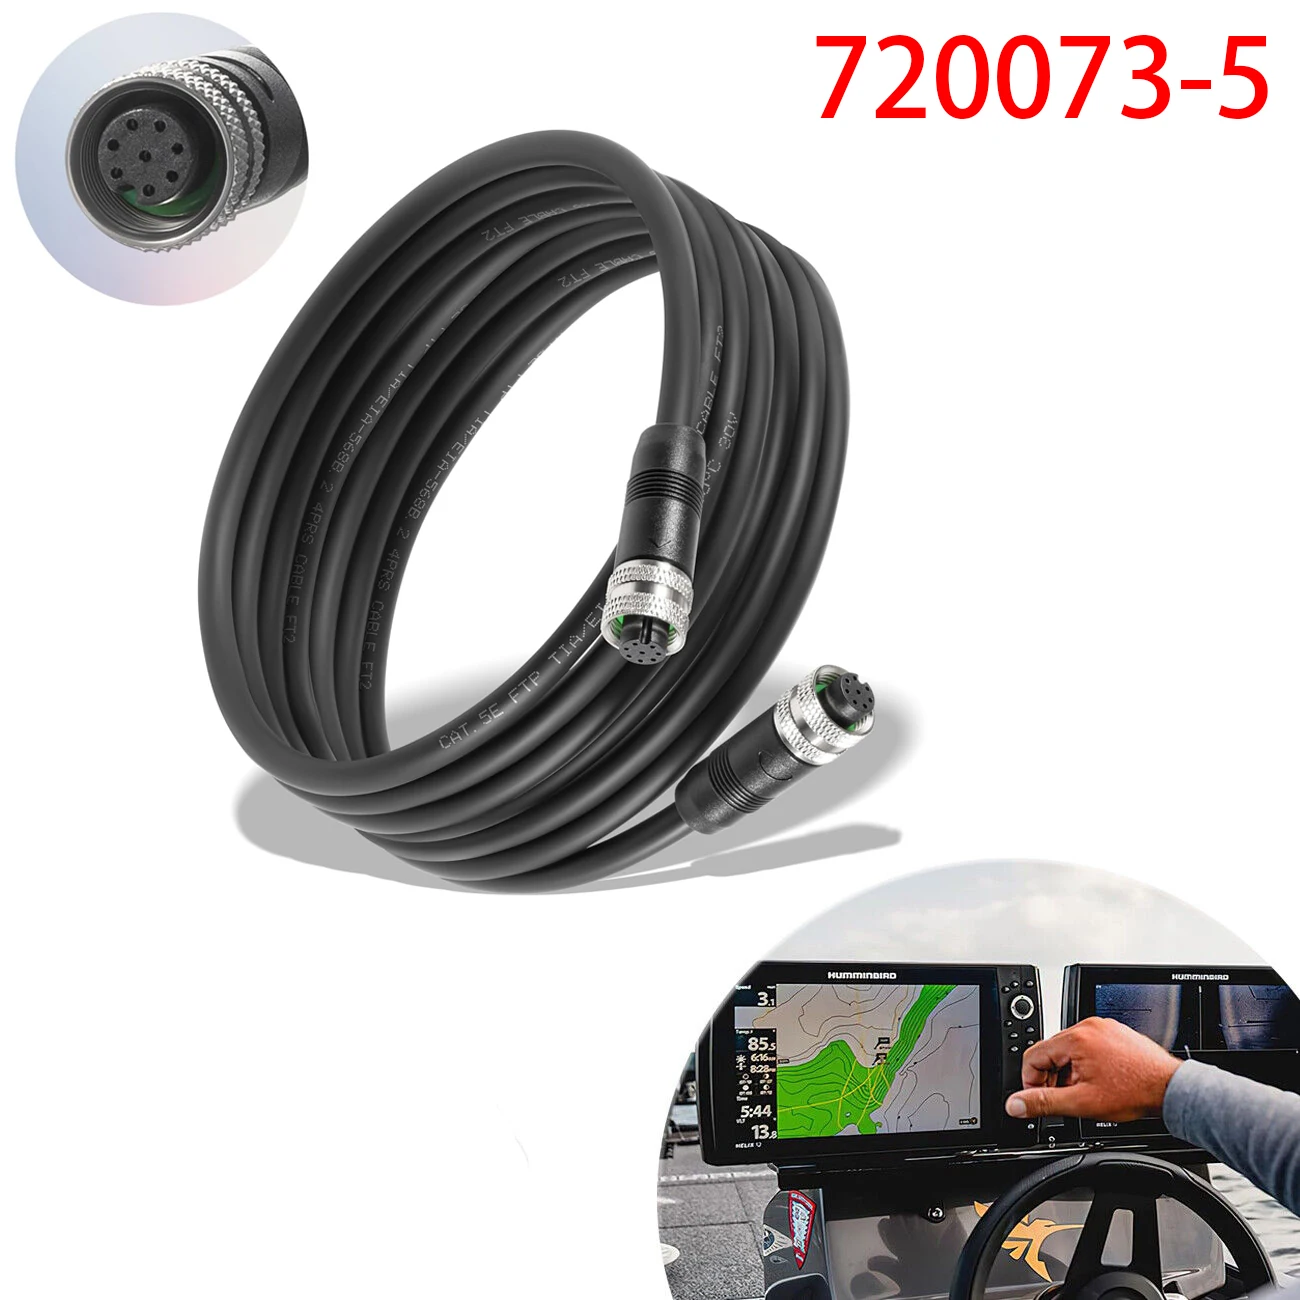 

Humminbird 720073-5 15 Foot Boat Ethernet Cable AS EC 15E 15ft Ethernet Cord Fit for Helix 15 12 10 9 8 7 and 1100 900 800 700